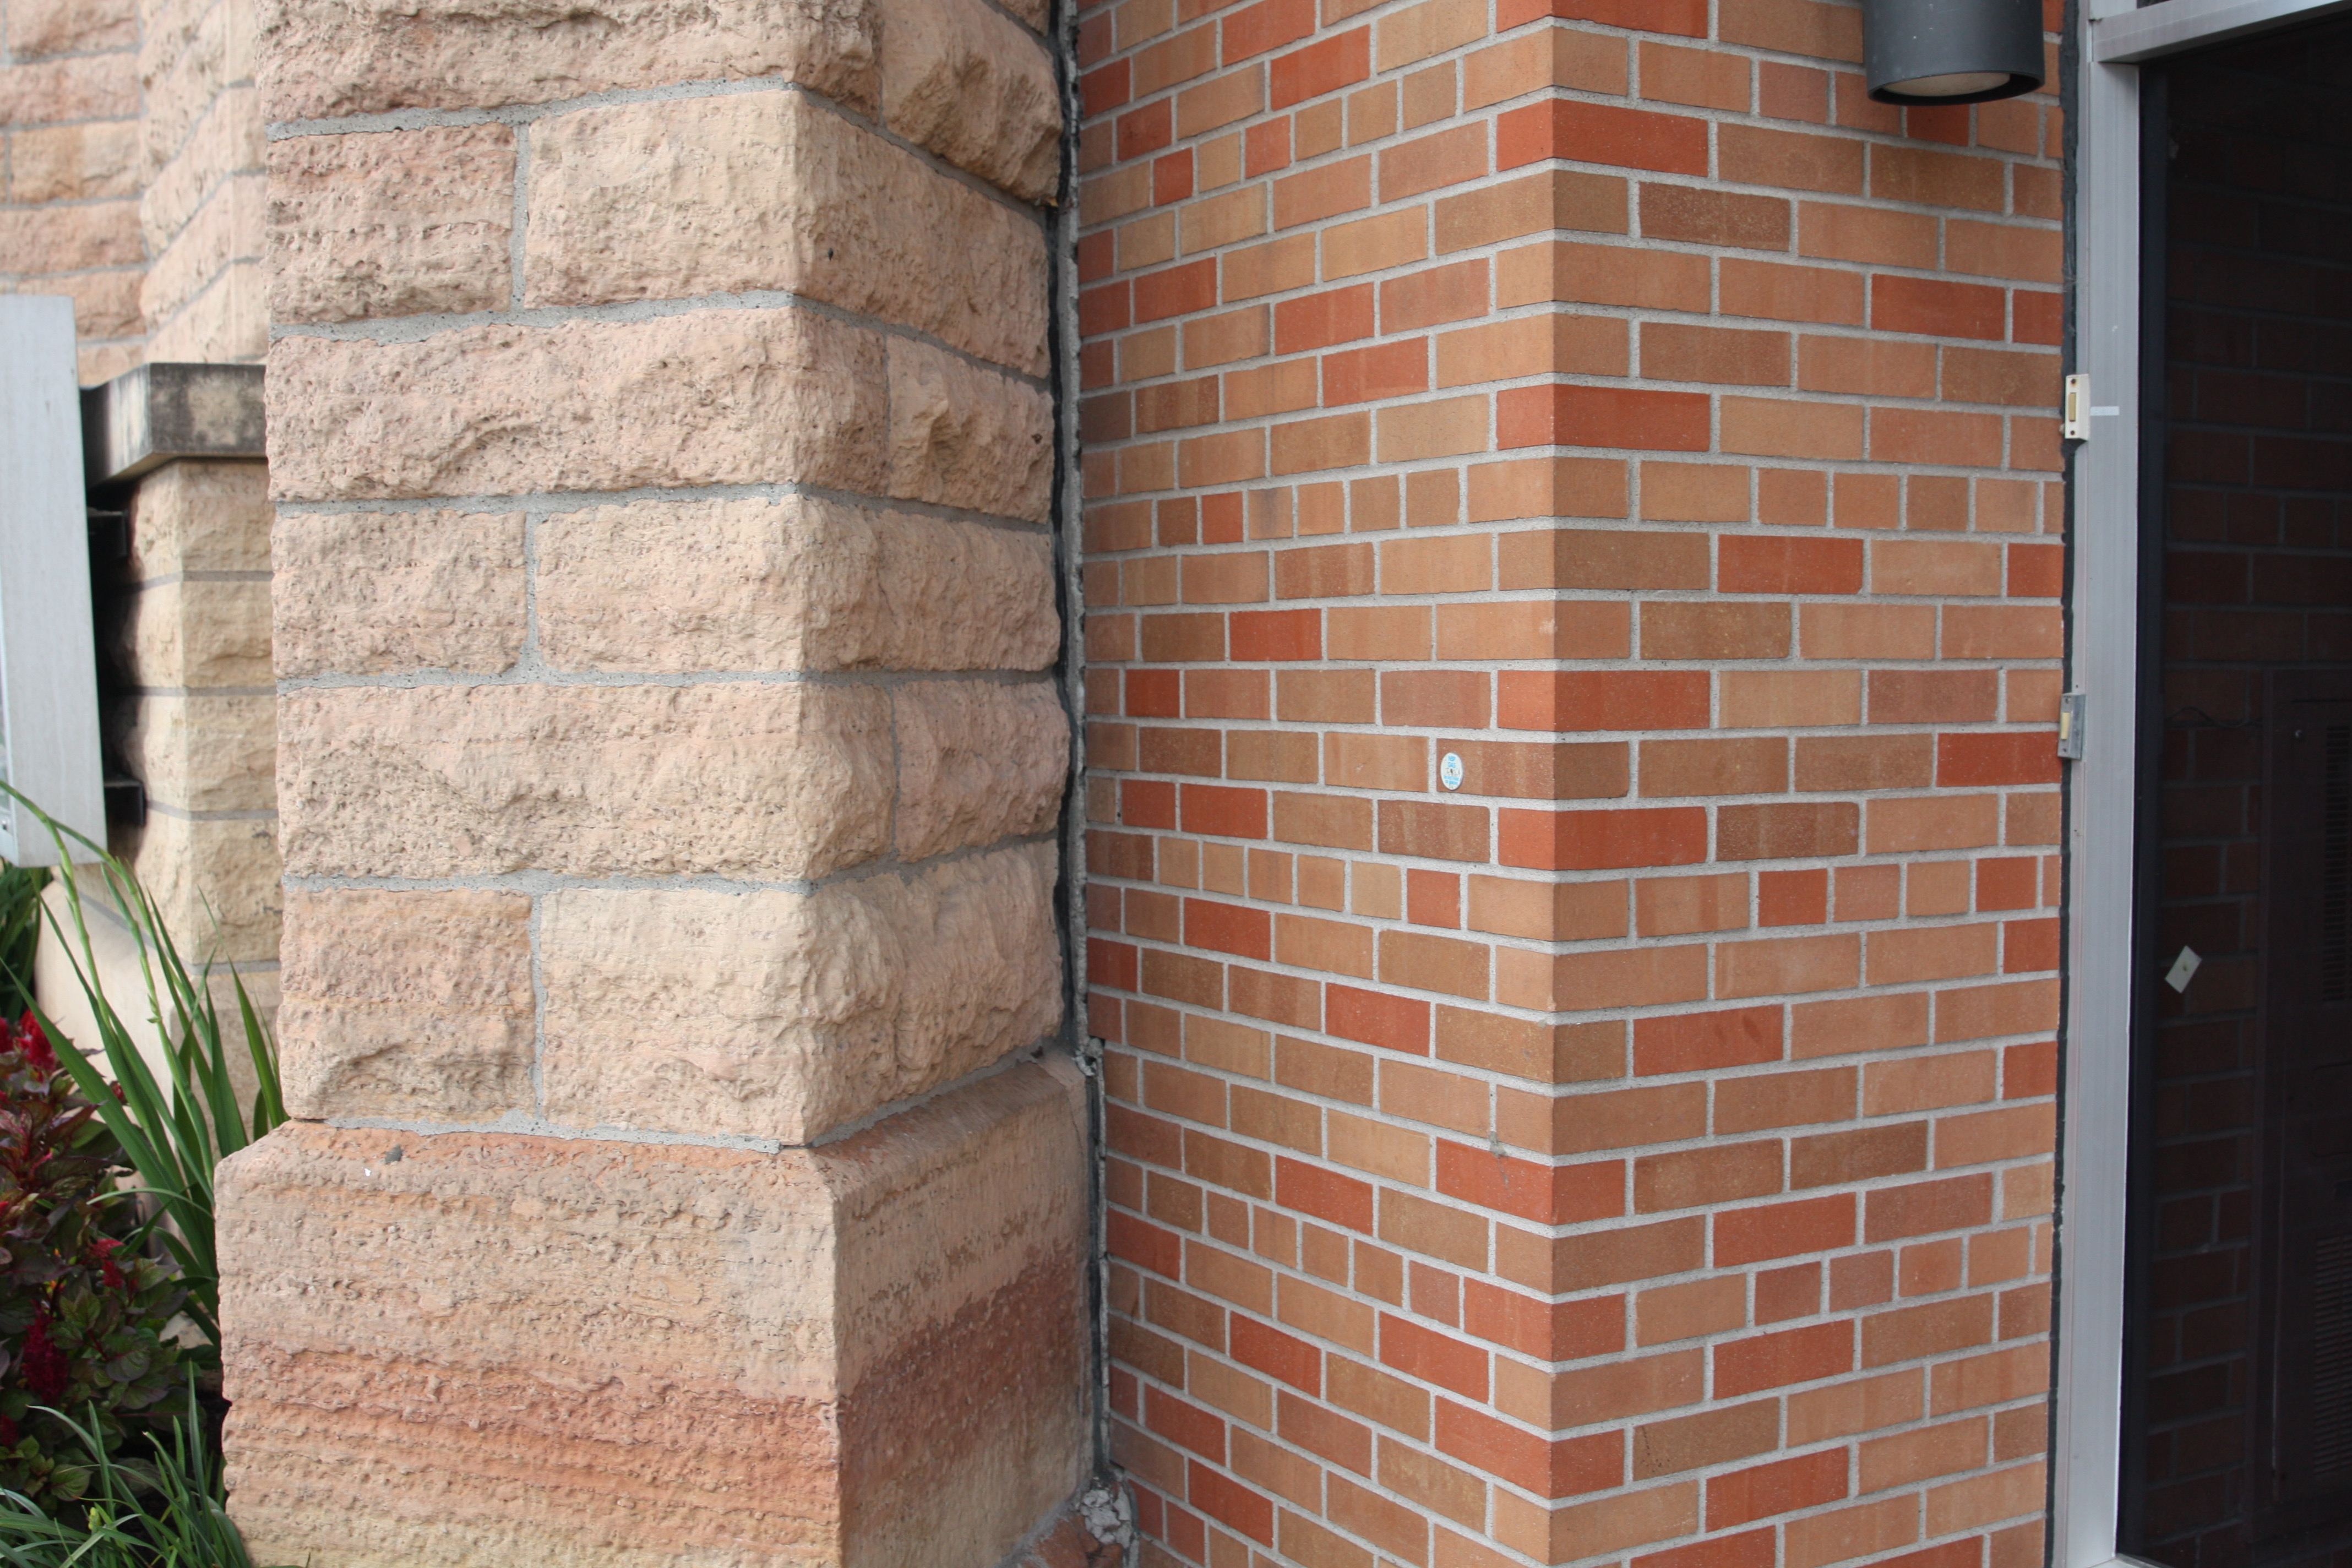 The stone work of 1875 building and the brick of the 1967 addition meet on the Wacouta Street side.